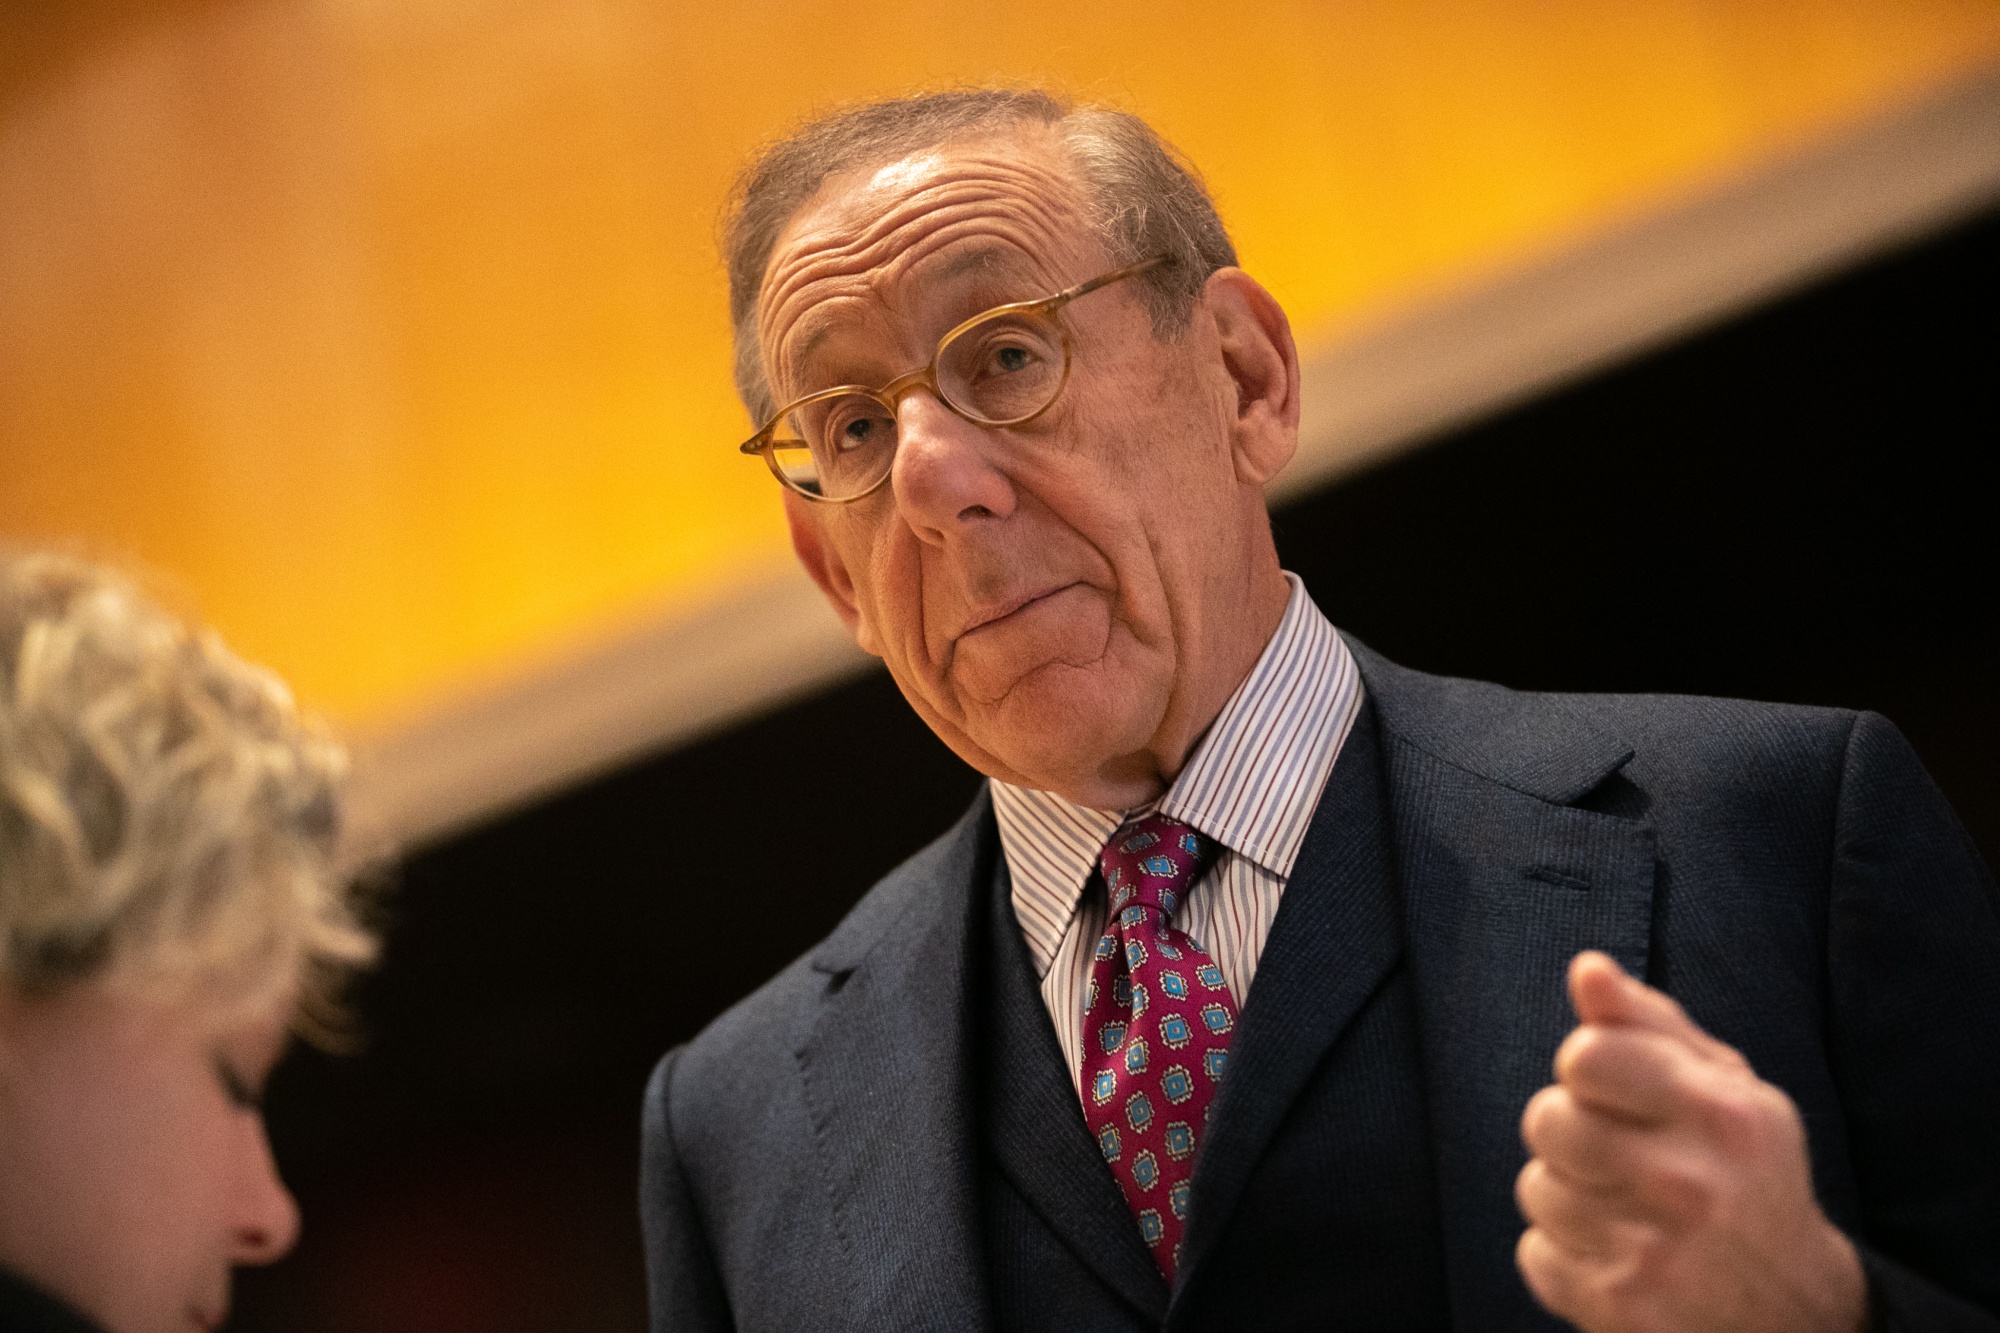 Real Estate Billionaire Stephen Ross Says Recession Would Drive People Back to Office